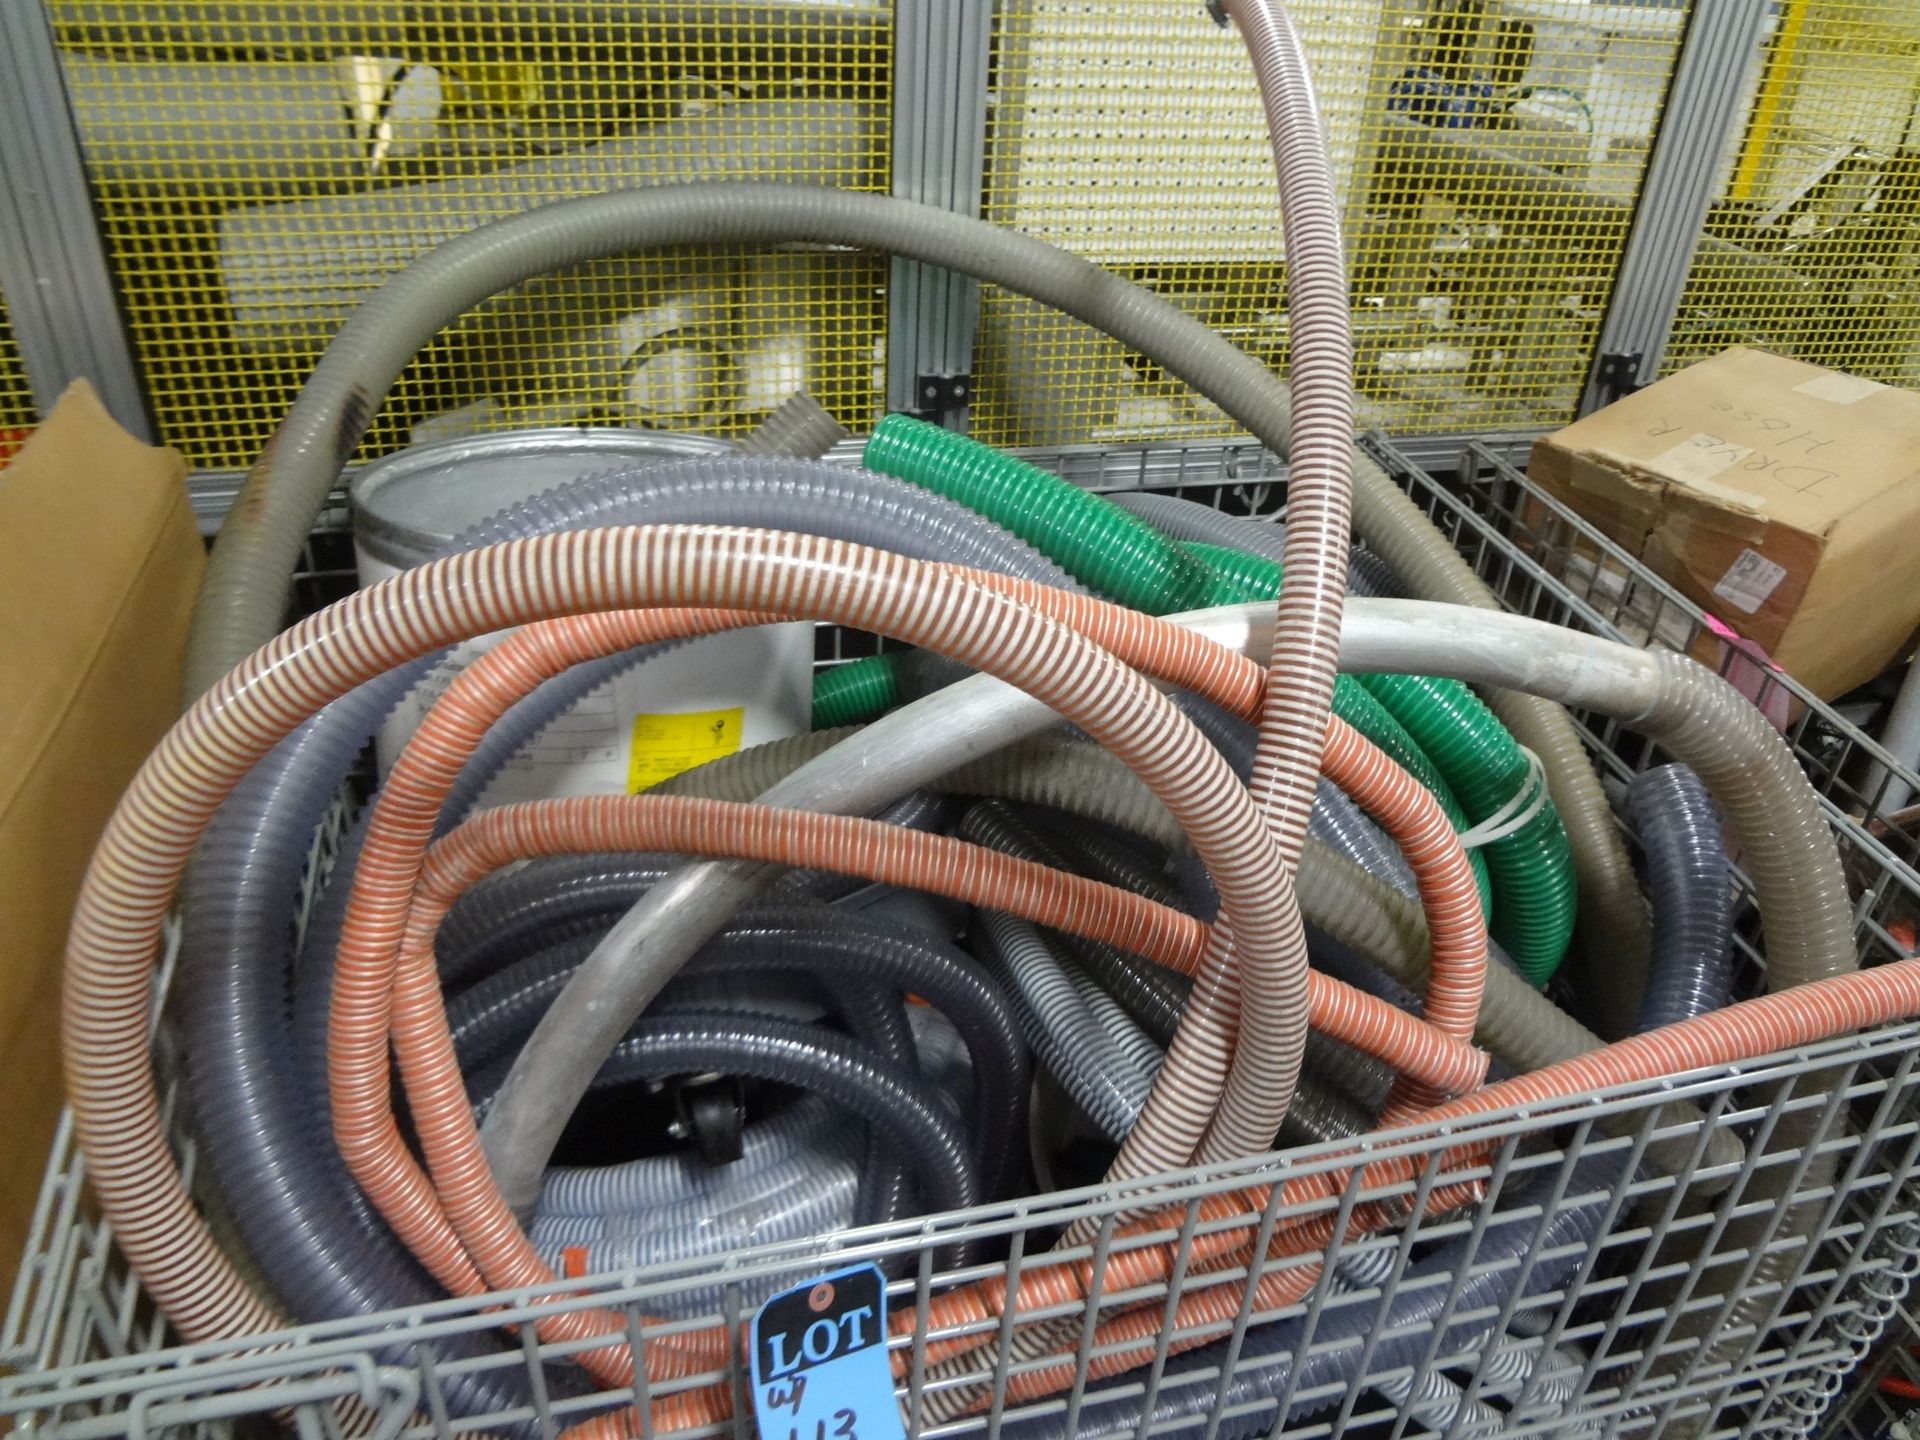 (LOT) OF (3) SKIDS OF MISCELLANEOUS MACHINE PARTS INCLUDING HOSE, TUBING, VAC LOADING, ETC. - Image 4 of 6